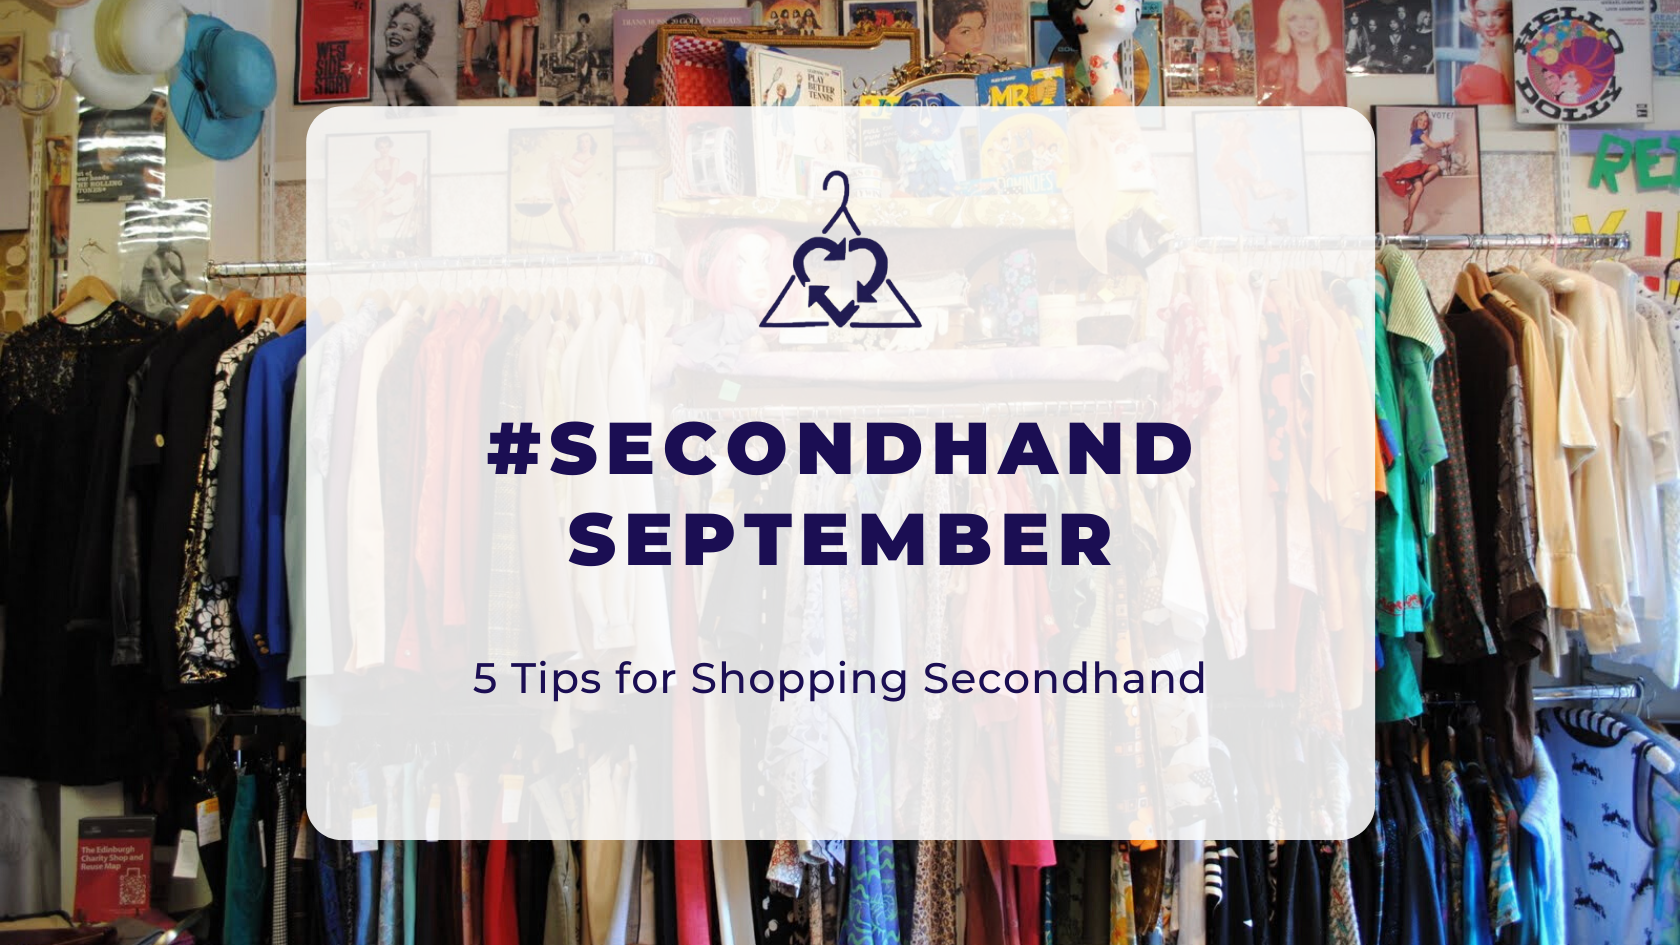 #SecondhandSeptember provides great tips and tricks fro shopping secondhand and thrifting locally.